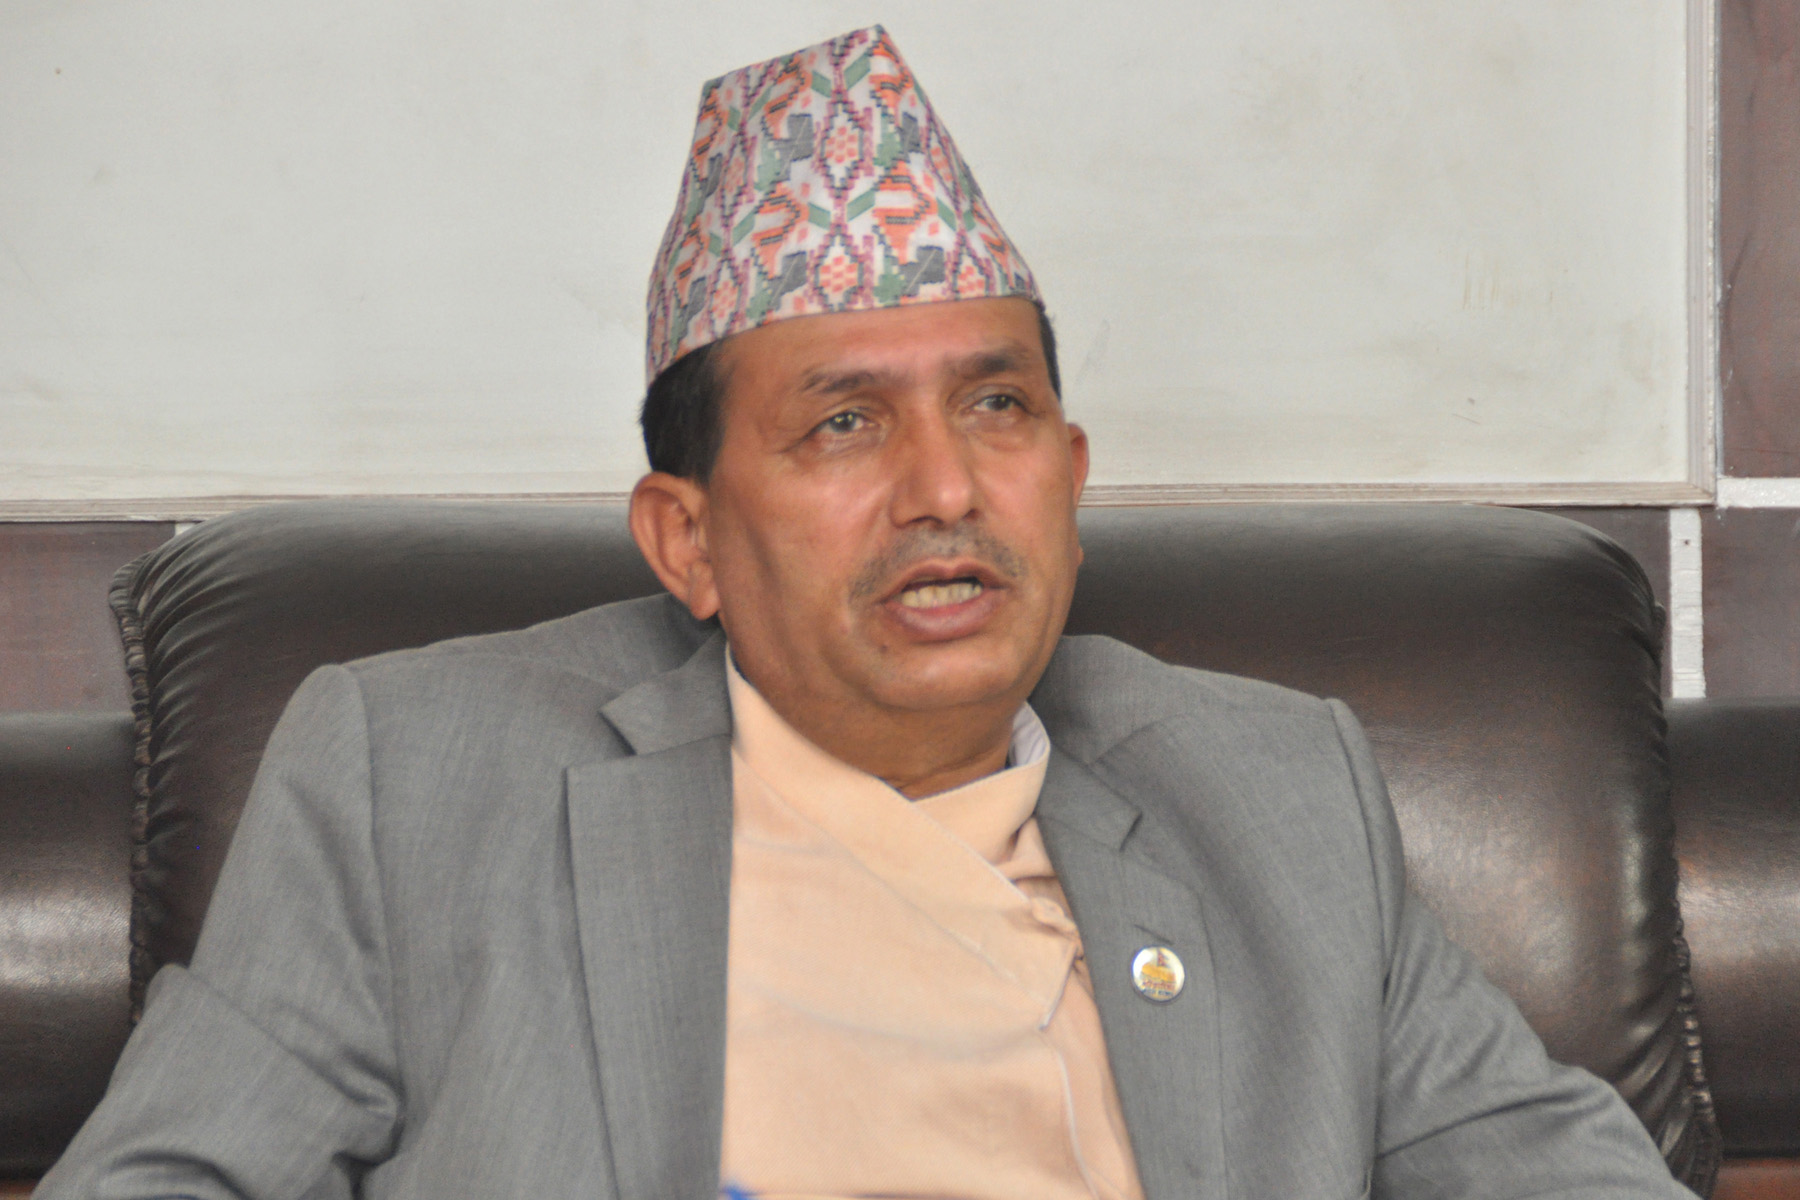 Problems in tourism sector fizzle out soon: Minister Dhakal